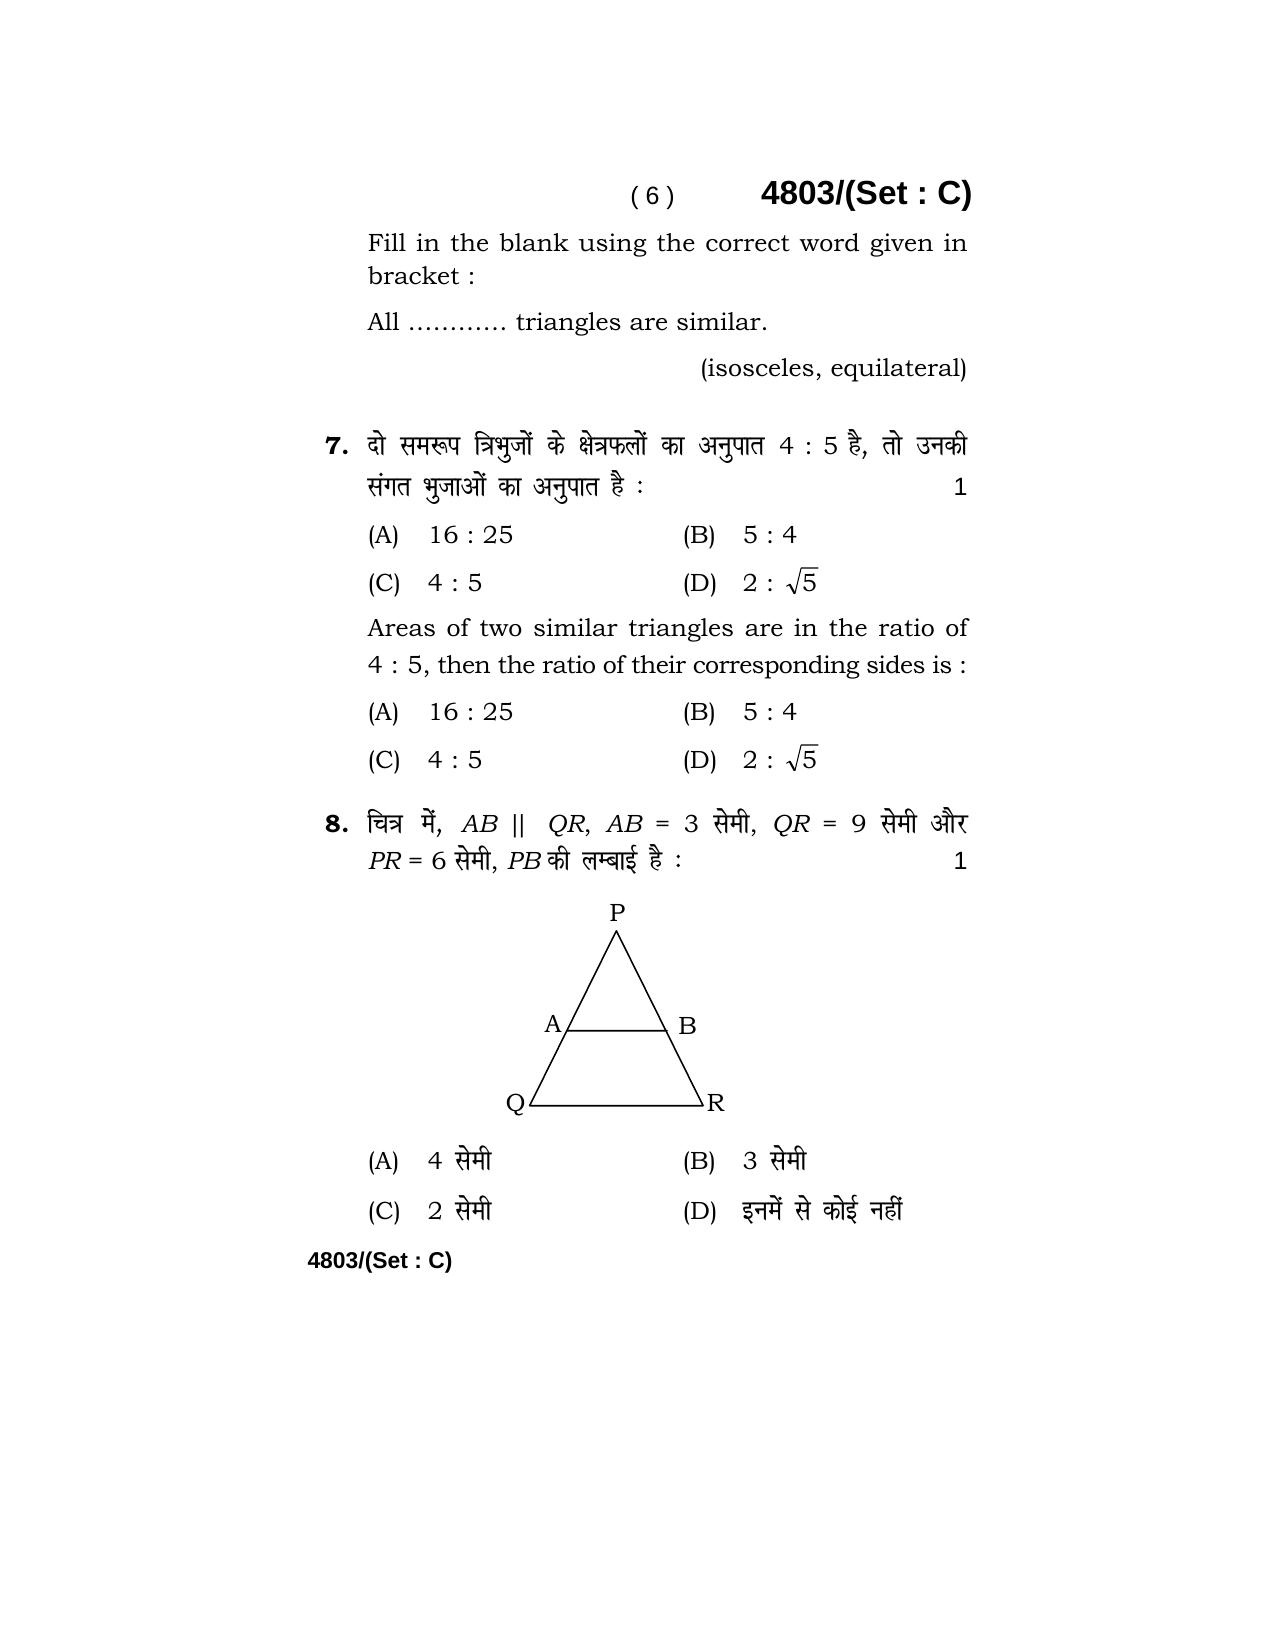 Haryana Board HBSE Class 10 Mathematics 2020 Question Paper - Page 38